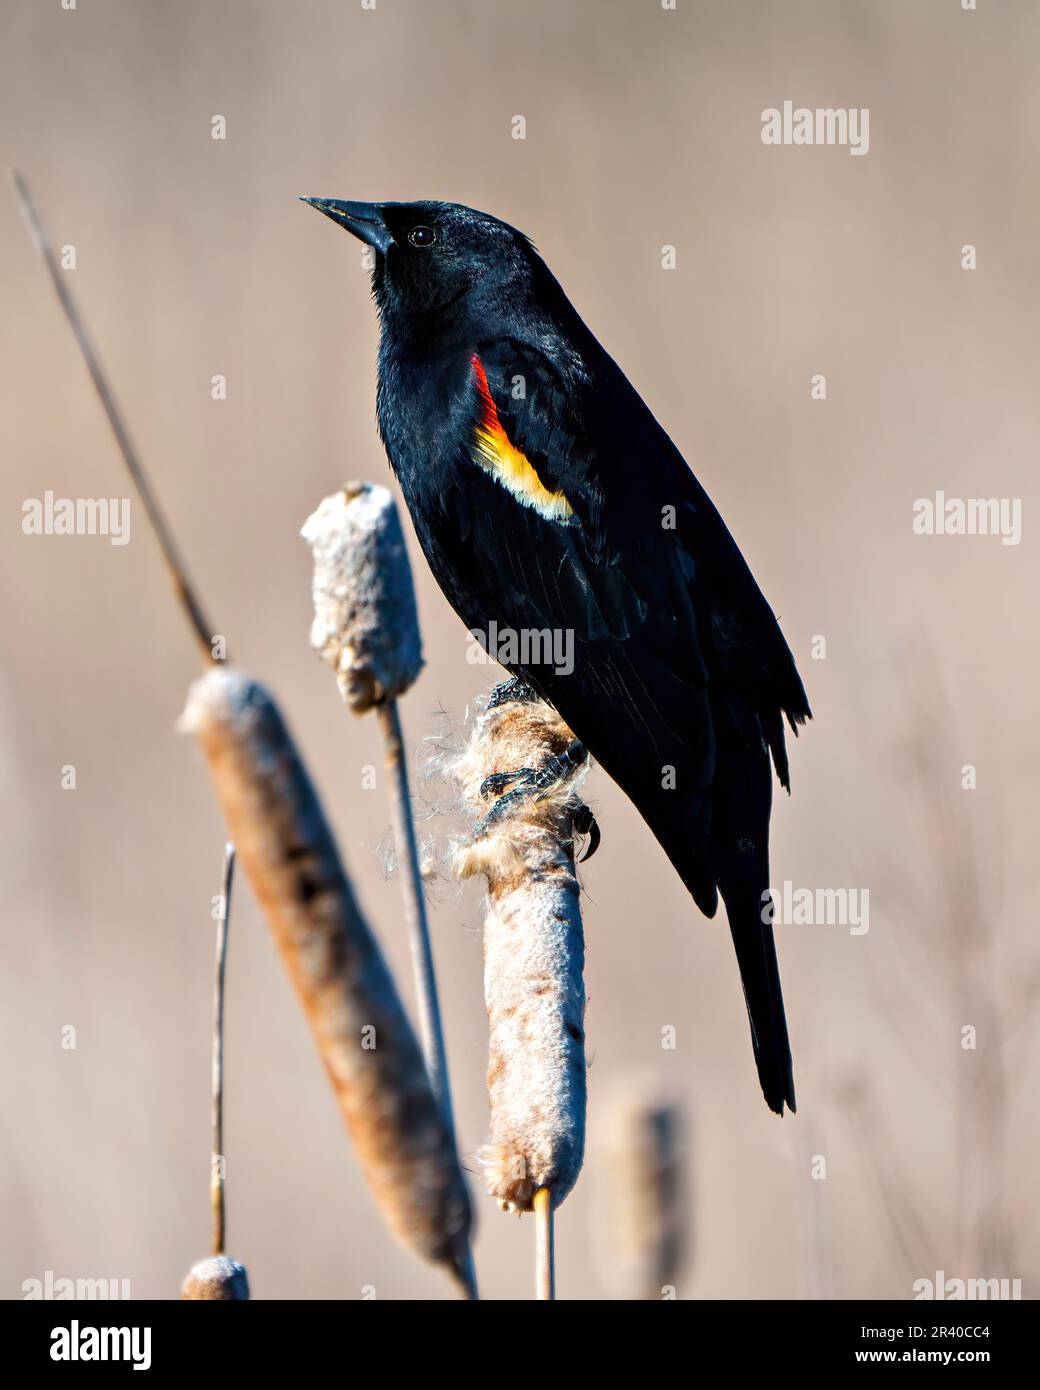 Red-Winged Blackbird close-up side view, perched on a cattail plant with brown background in its environment and habitat surrounding. Stock Photo